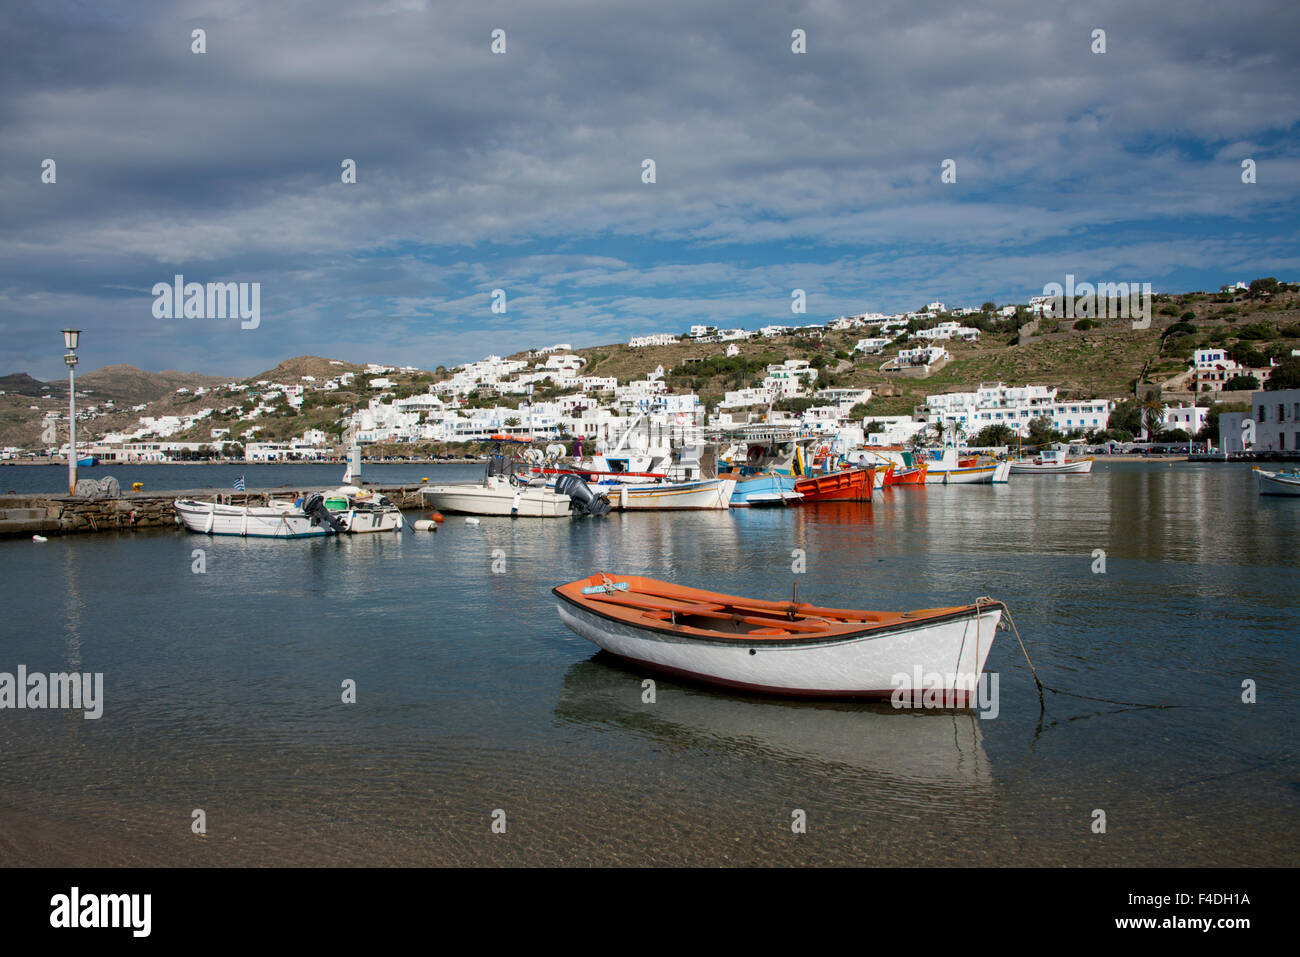 Greece, Cyclades, Mykonos, Hora. Port and harbor area with Greek fishing boats. Island countryside in the distance. (Large format sizes available). Stock Photo